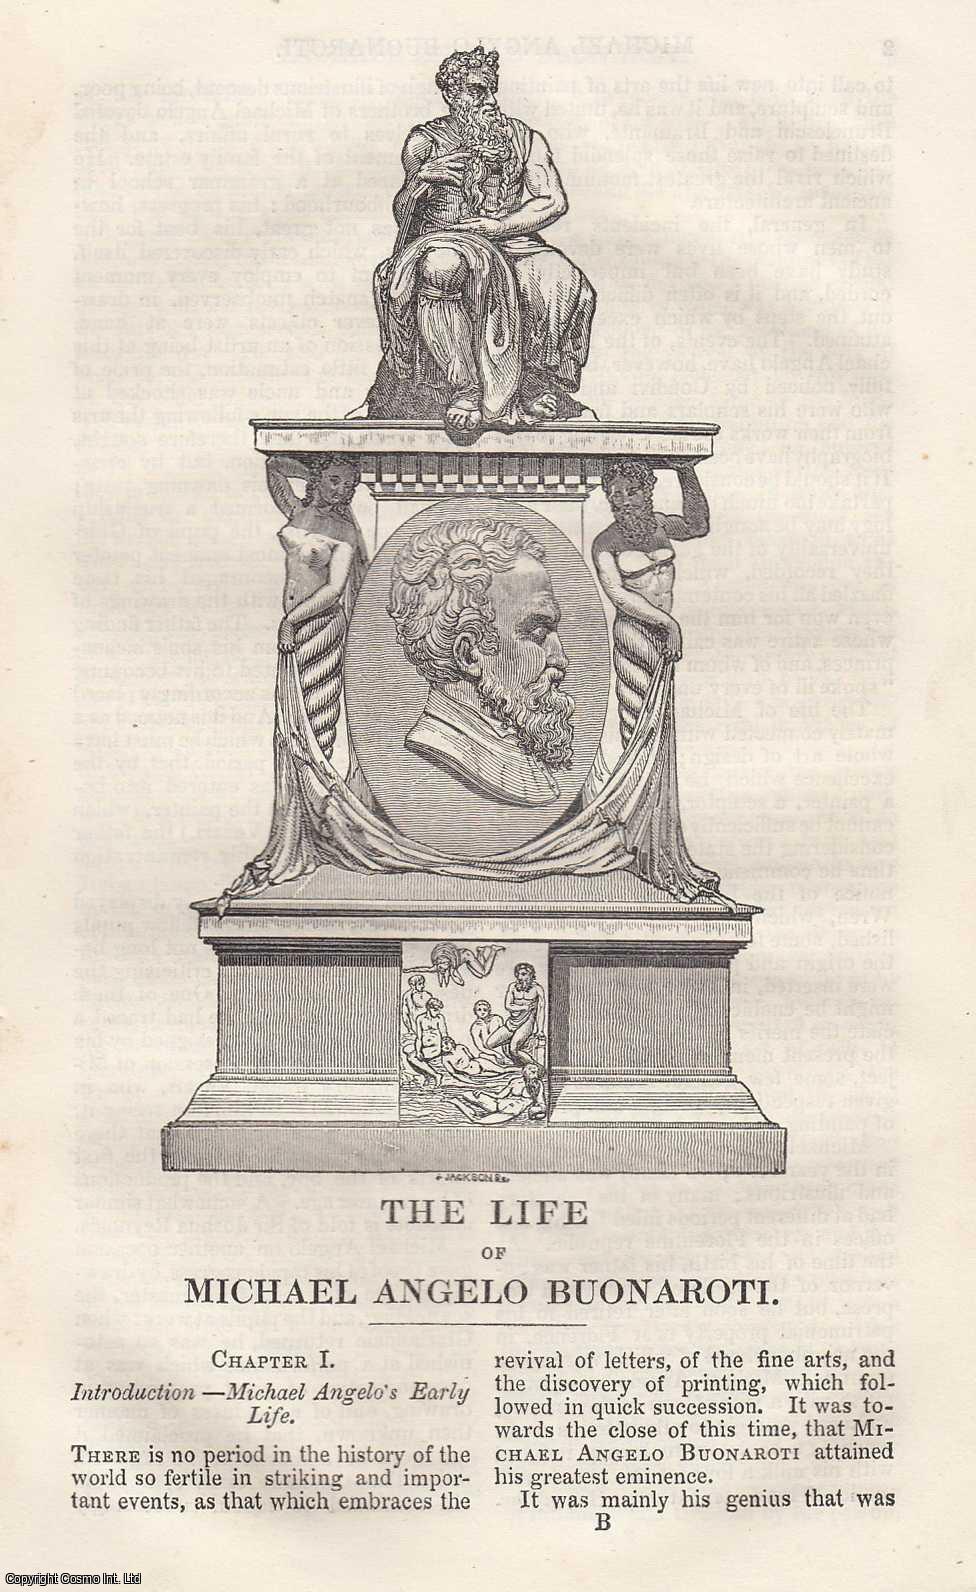 No Author Stated - The Life of Michael Angelo Buonaroti [Michaelangelo]. Published by [S.D.U.K.] 1833.